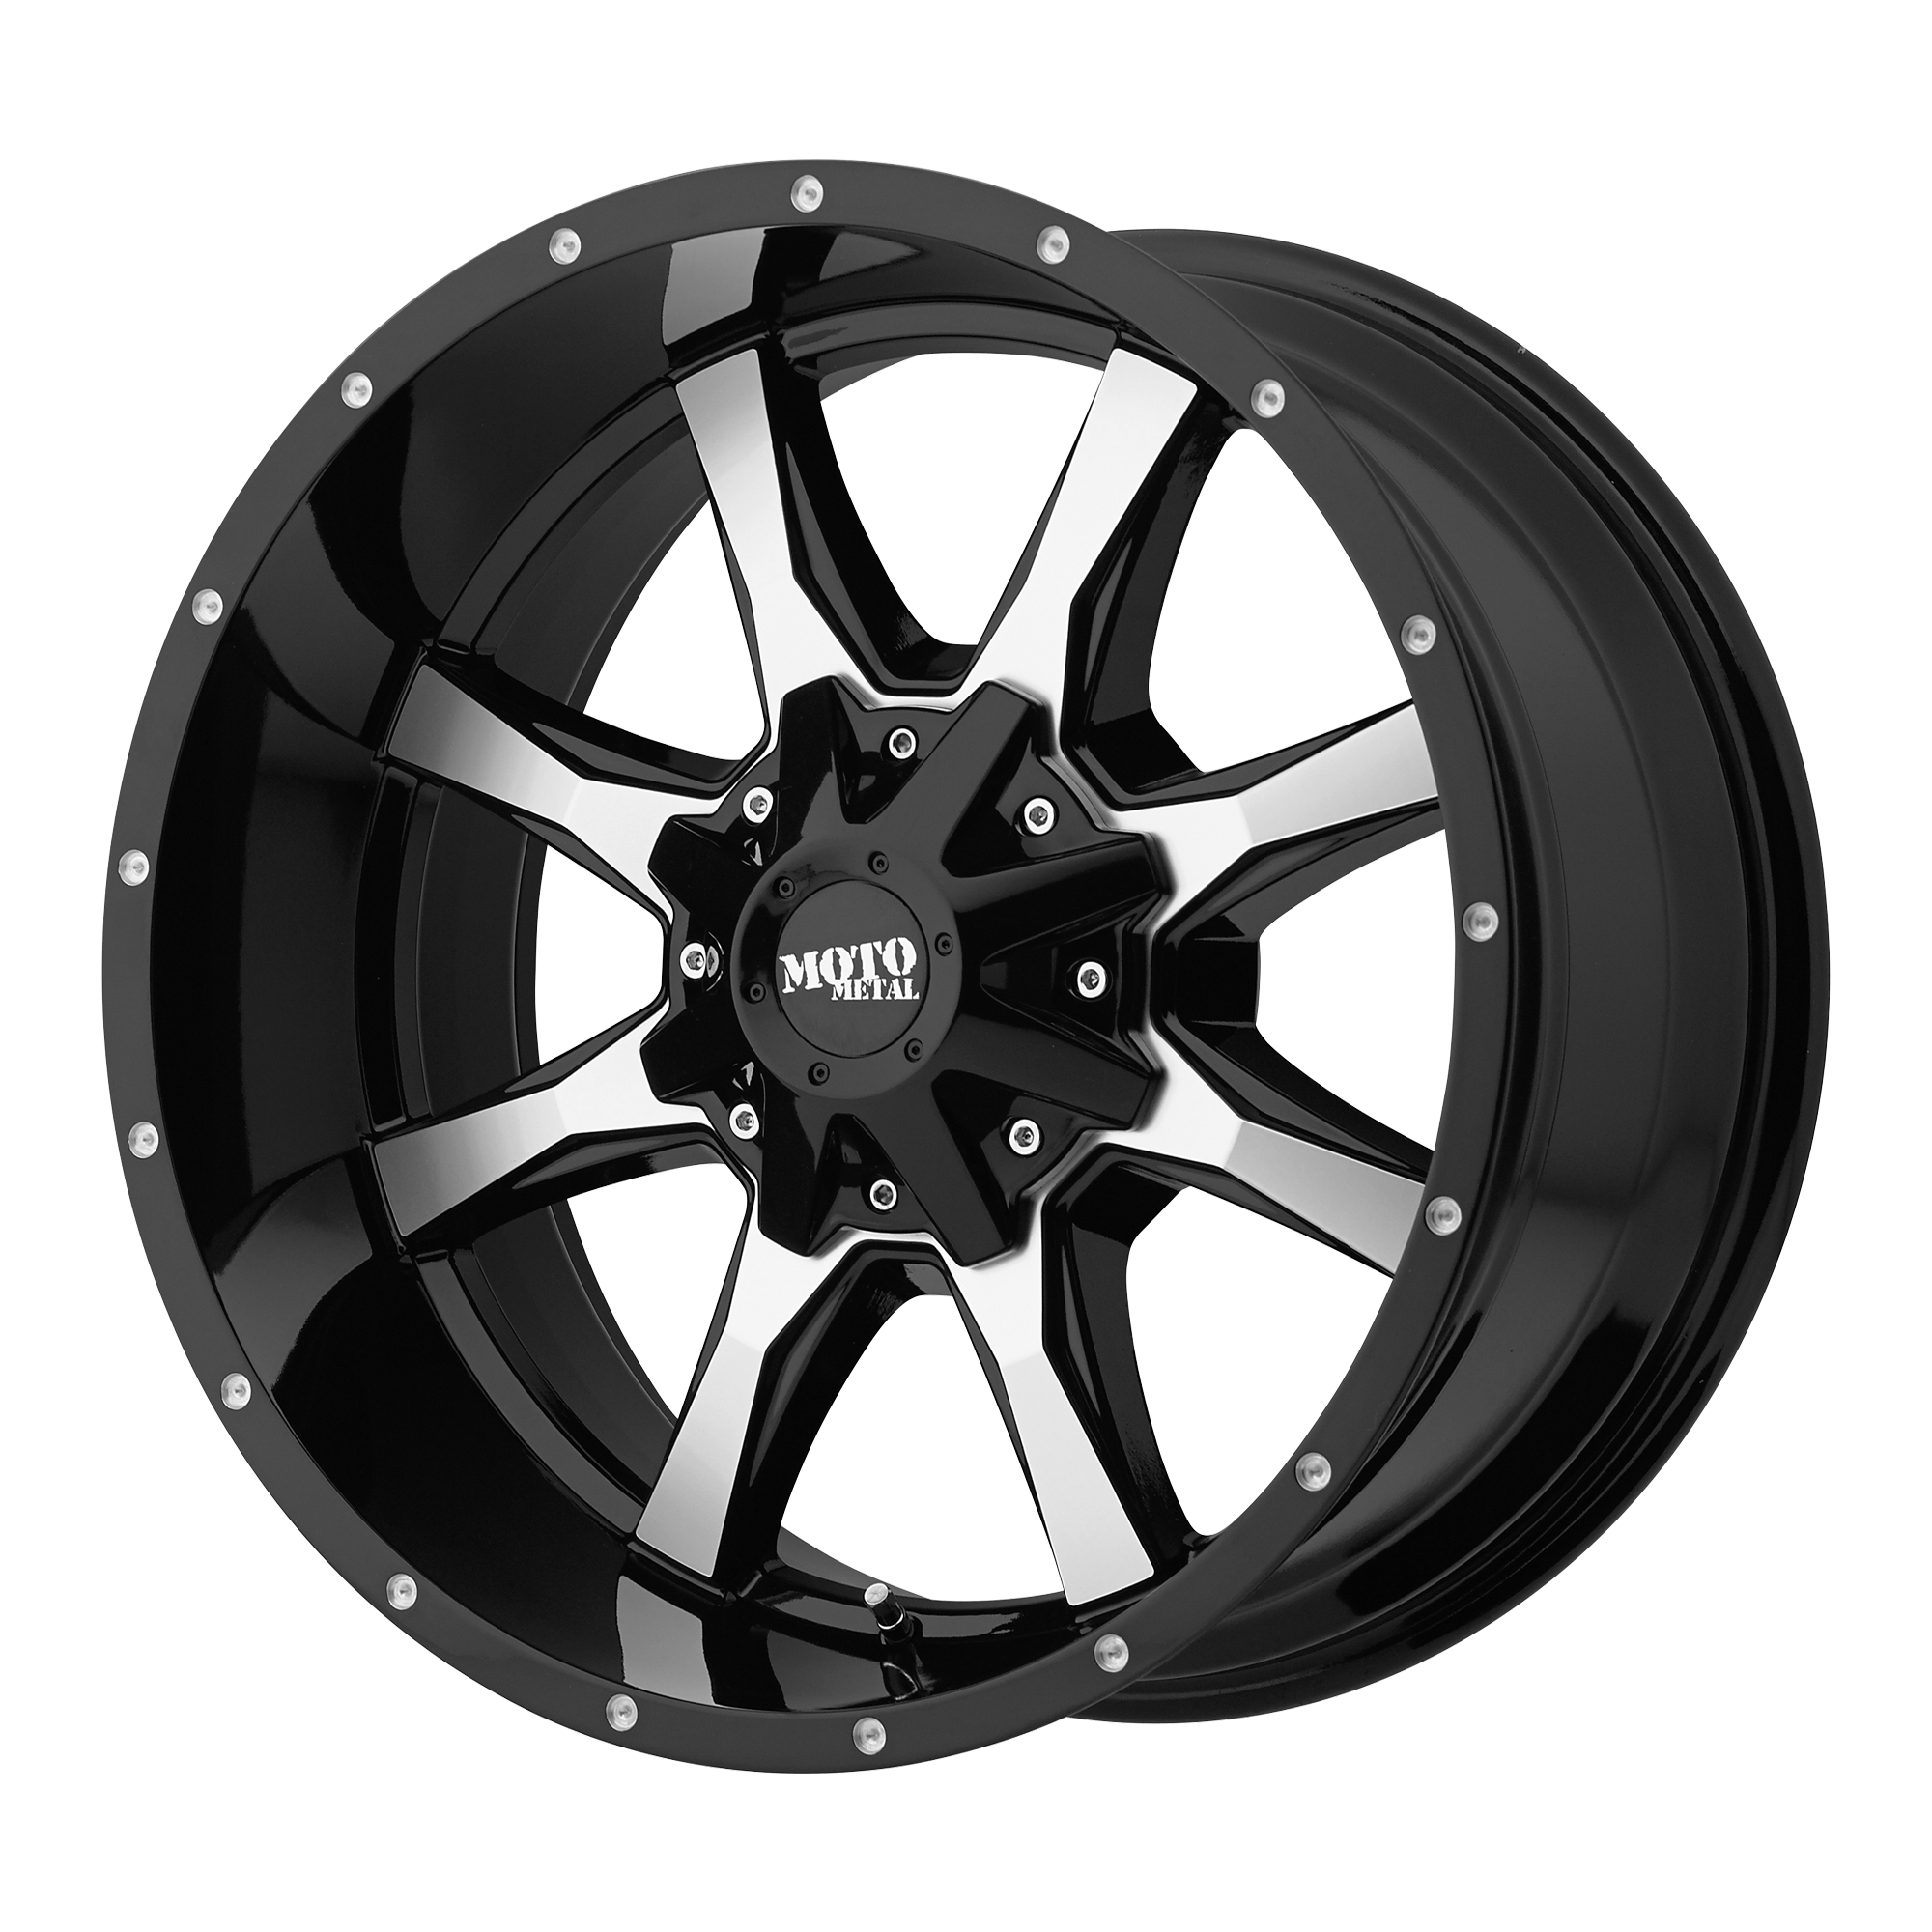 MO970 16x8 6x120.00/6x139.70 GLOSS BLACK W/ MACHINED FACE (0 mm) - Tires and Engine Performance